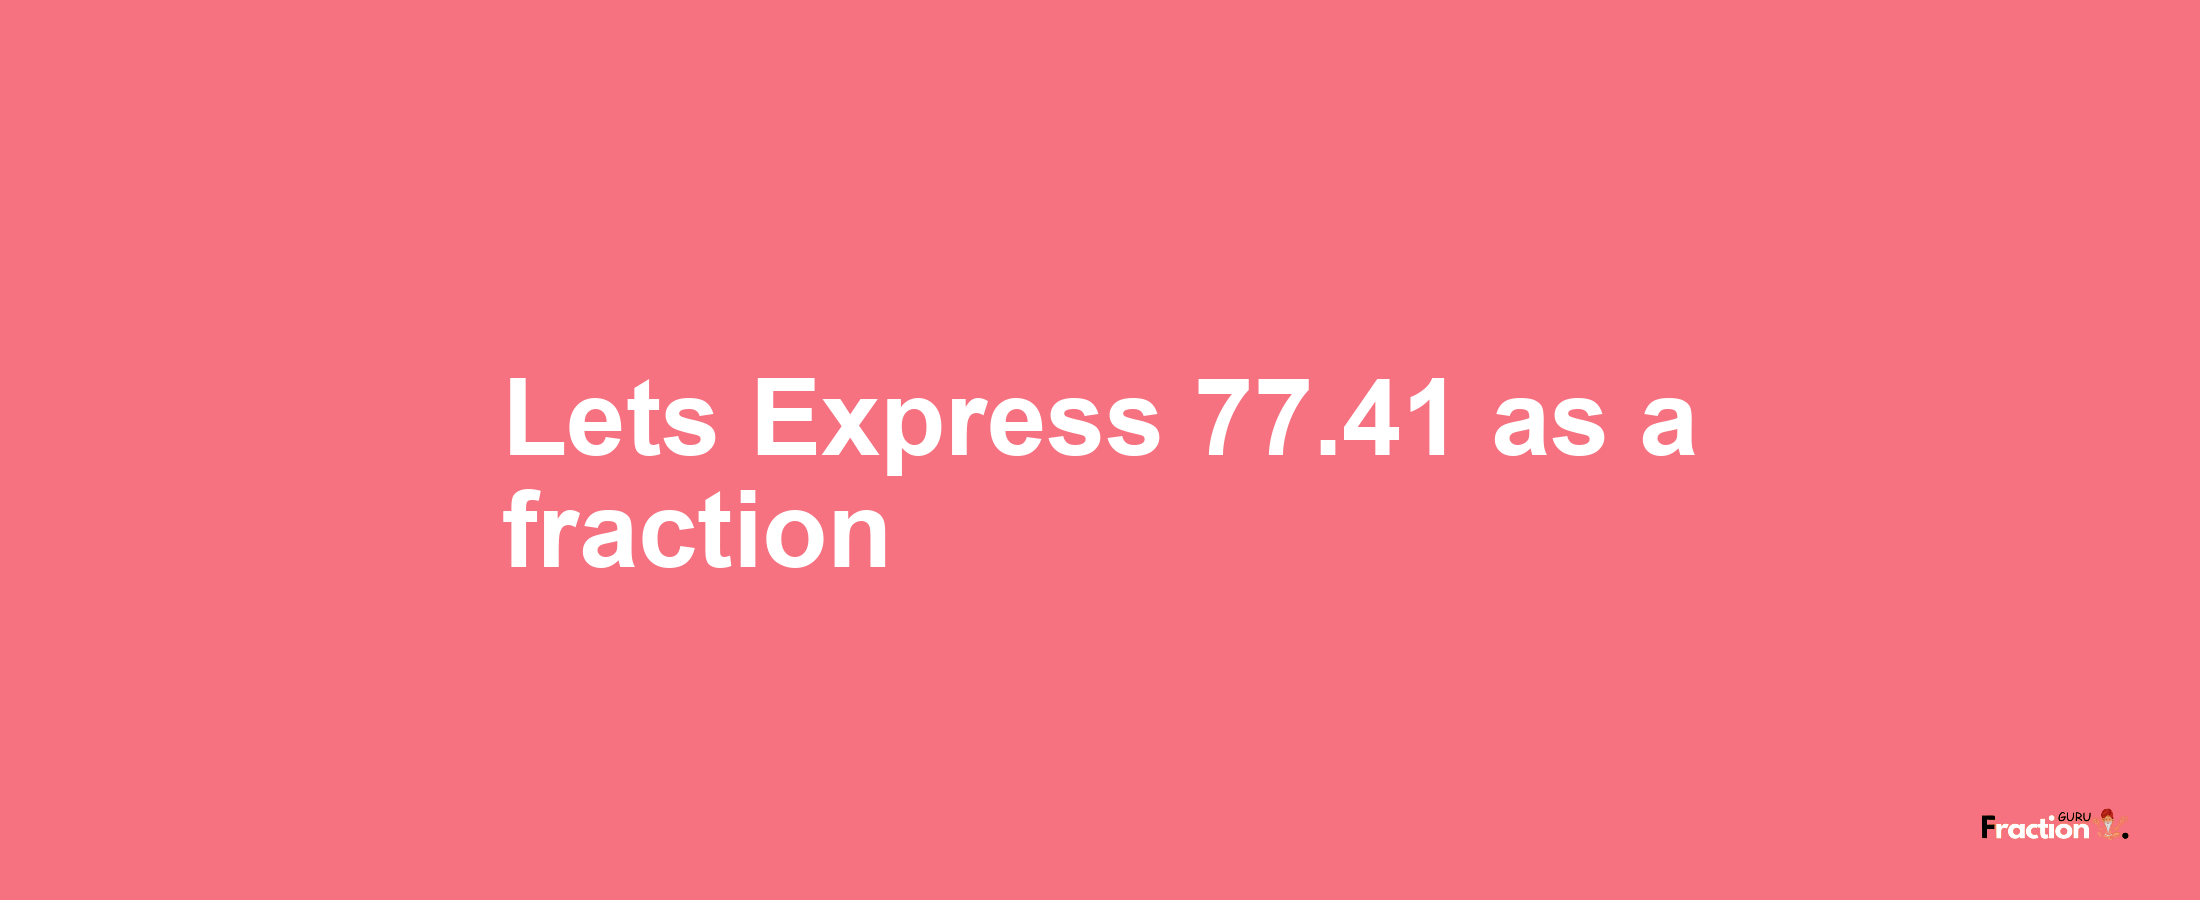 Lets Express 77.41 as afraction